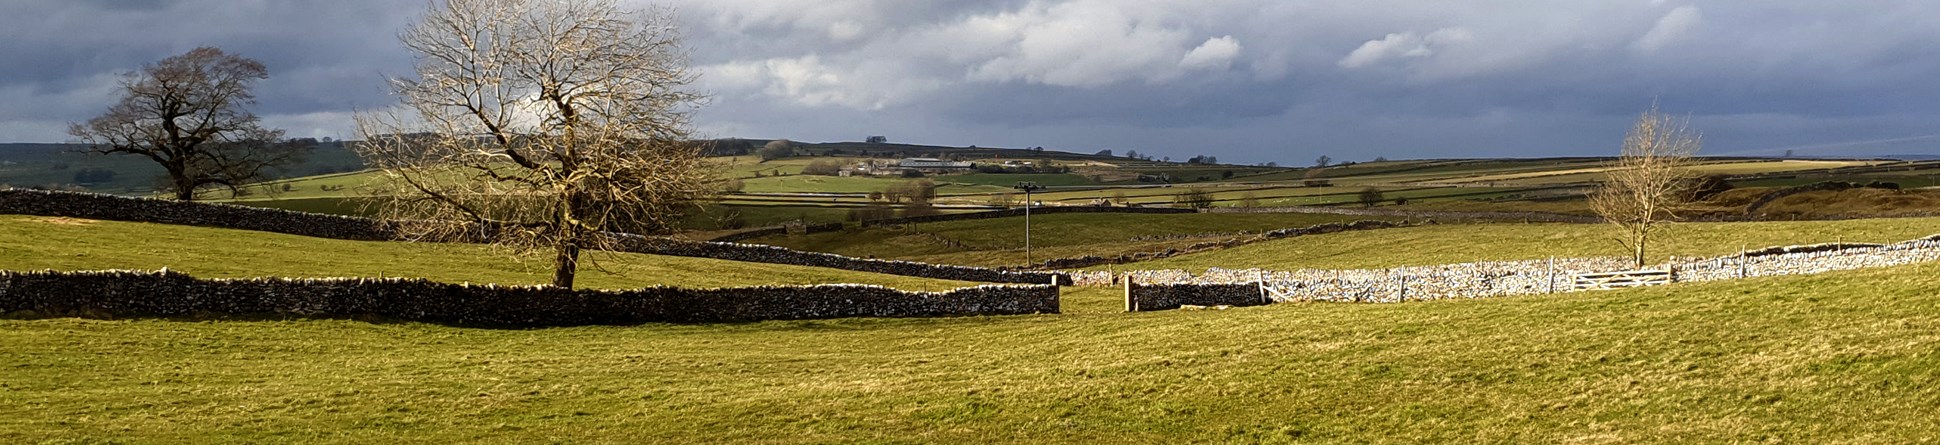 Magpie Mine, a scheduled monument near Bakewell, showing rolling fields and drystone walls.